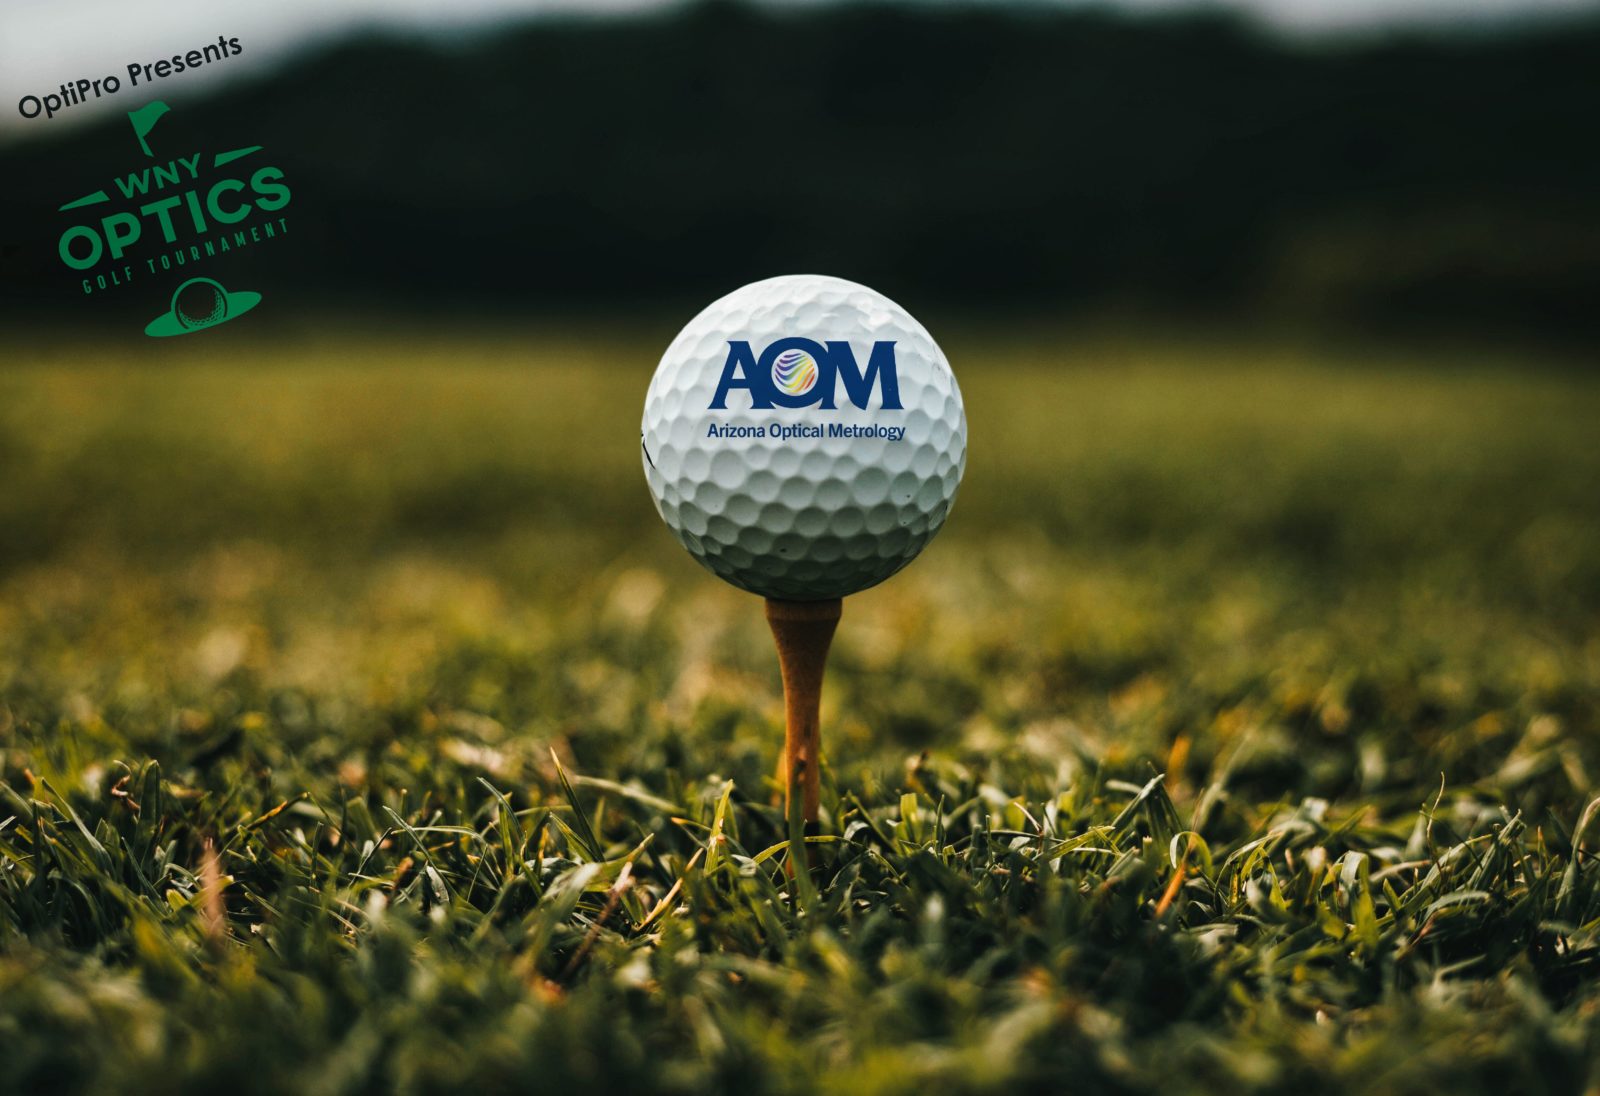 A close up of a golf ball with the AOM logo on it sitting on a tee